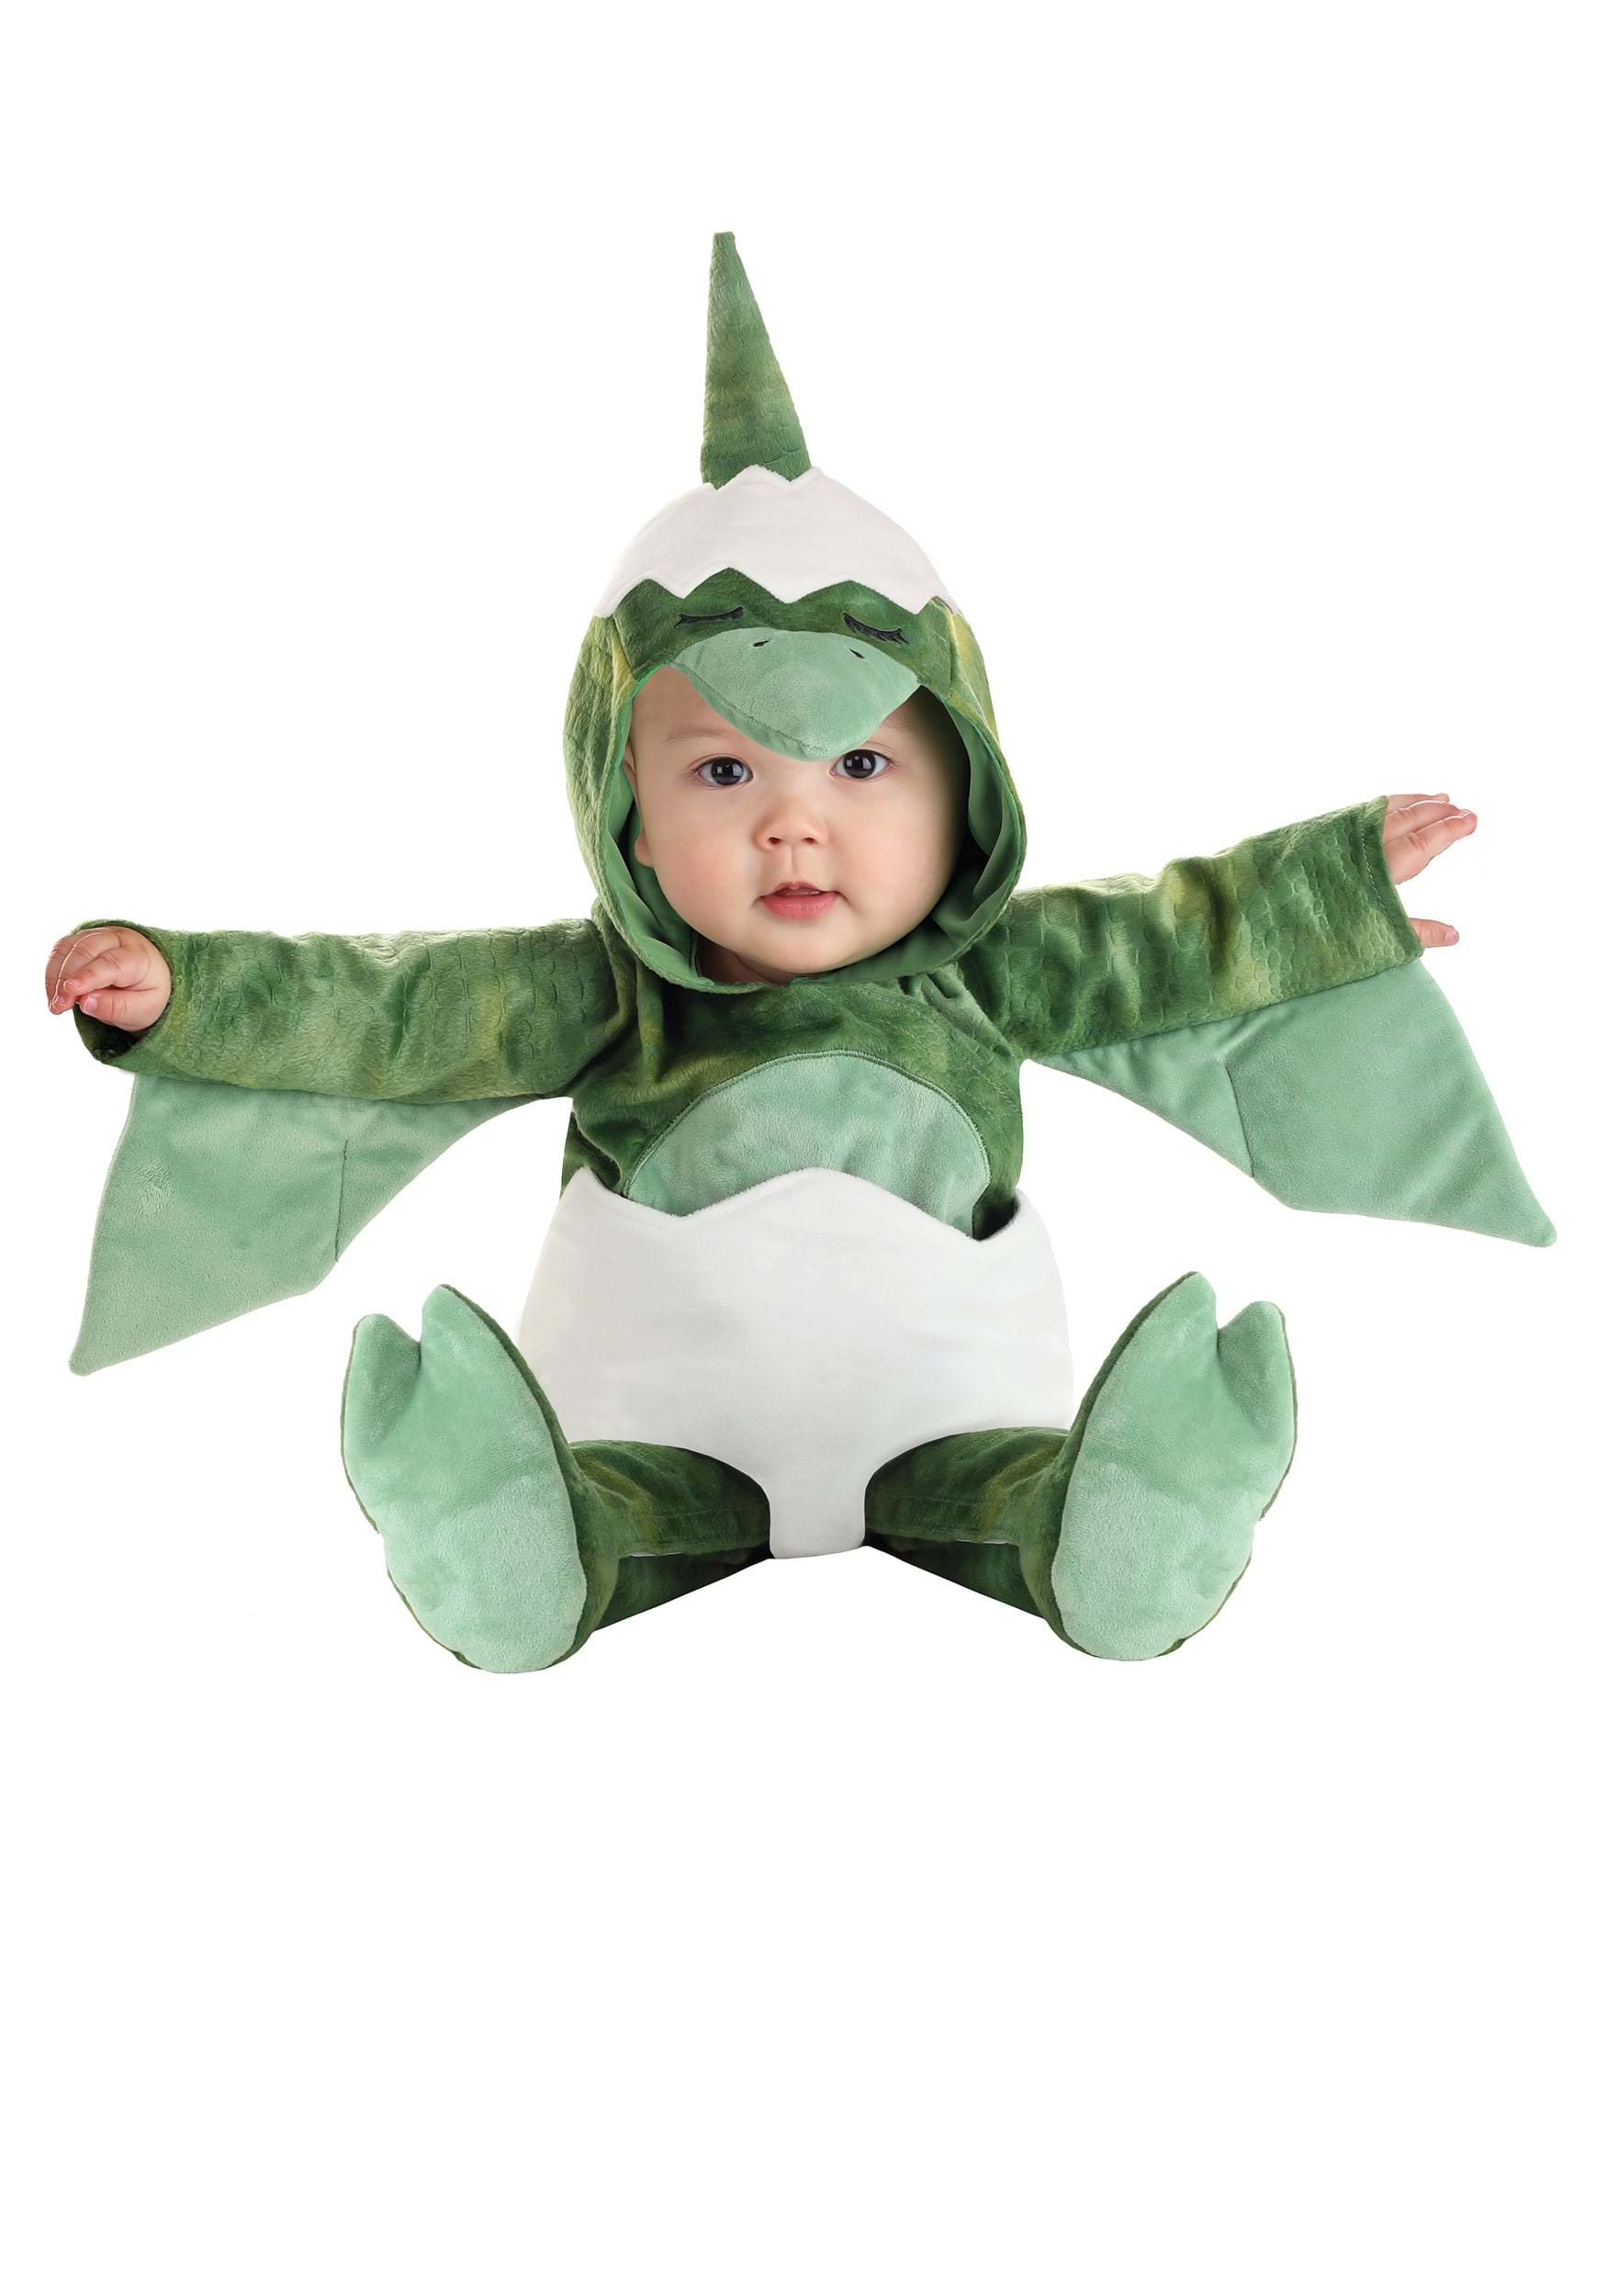 Photos - Fancy Dress FUN Costumes Hatching Pterodactyl Infant Costume Green/White